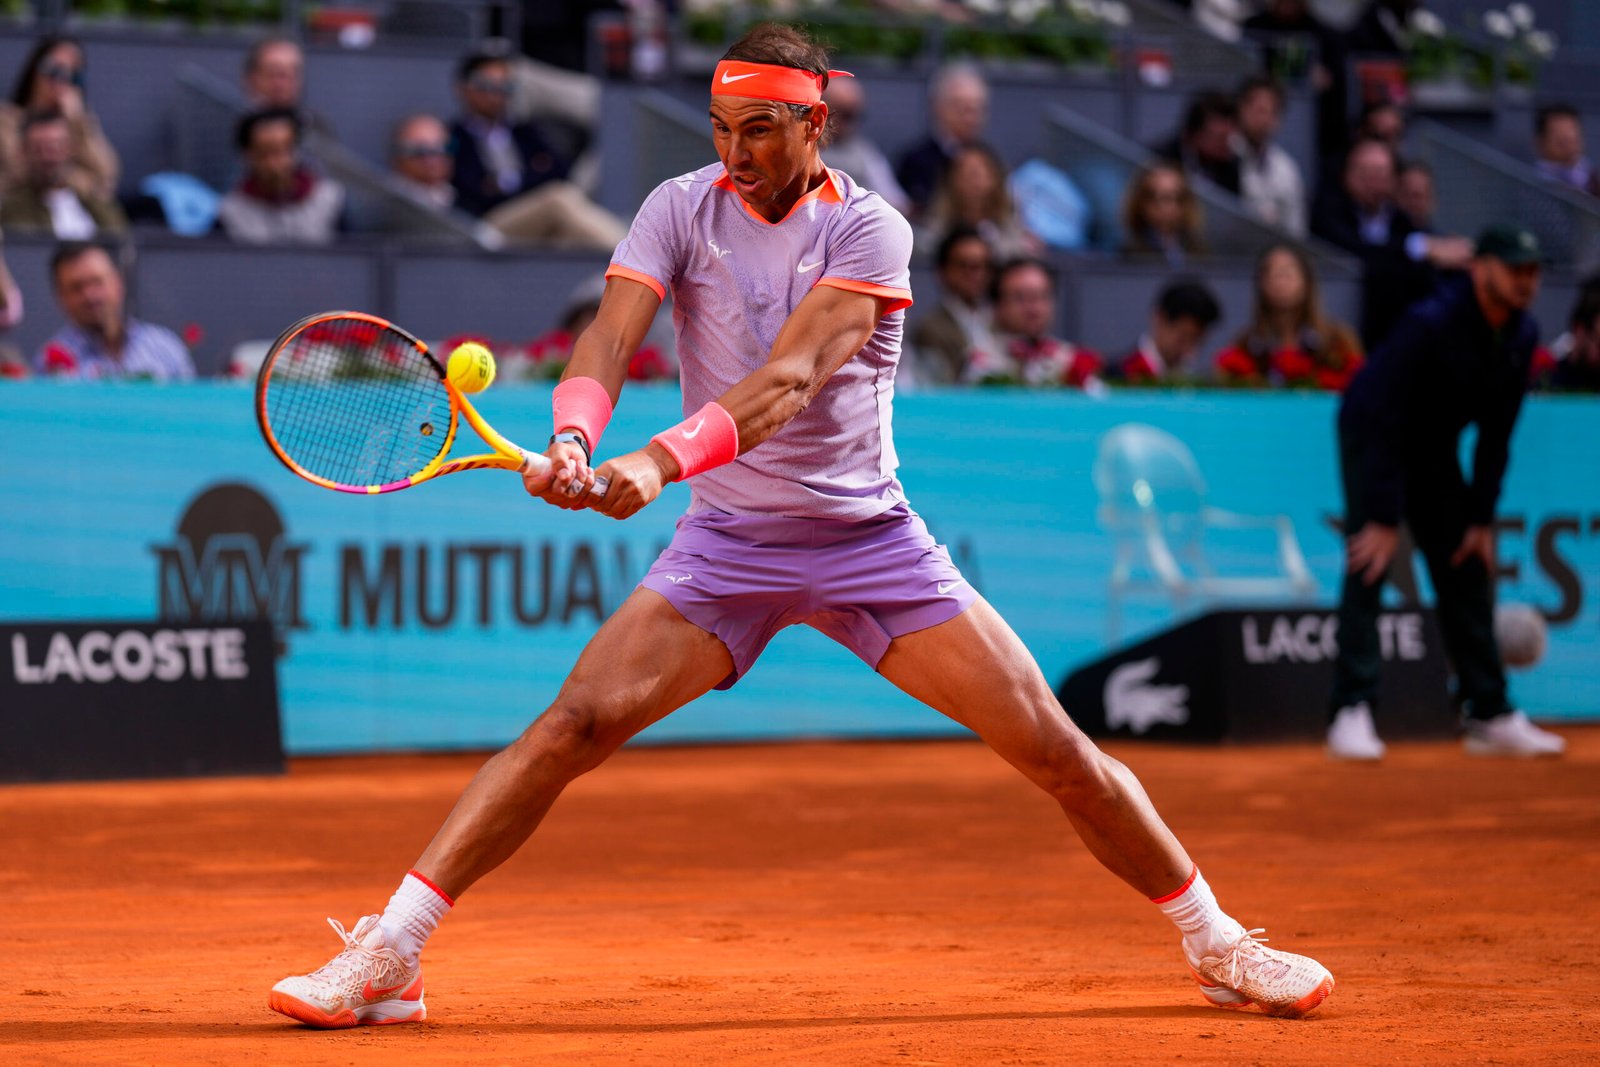 Rafael Nadal cruises to win in Madrid Open first round